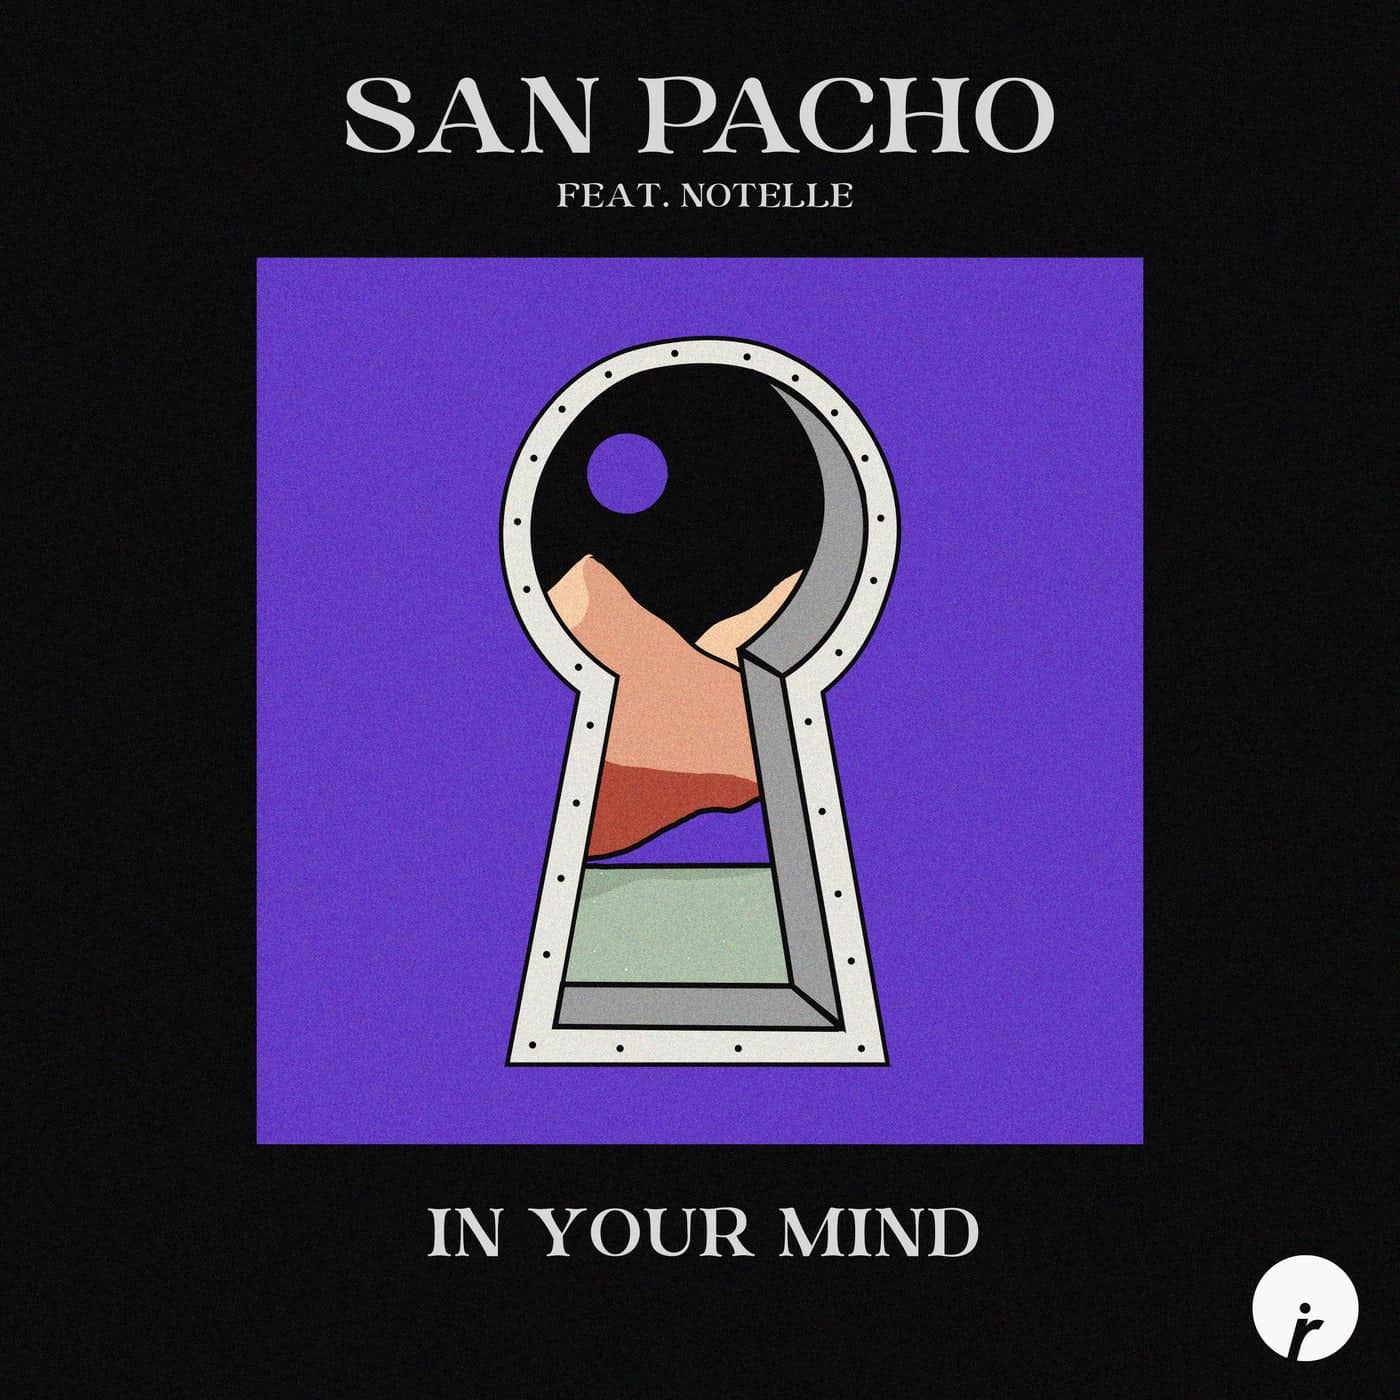 image cover: In Your Mind by Notelle, San Pacho on Insomniac Records